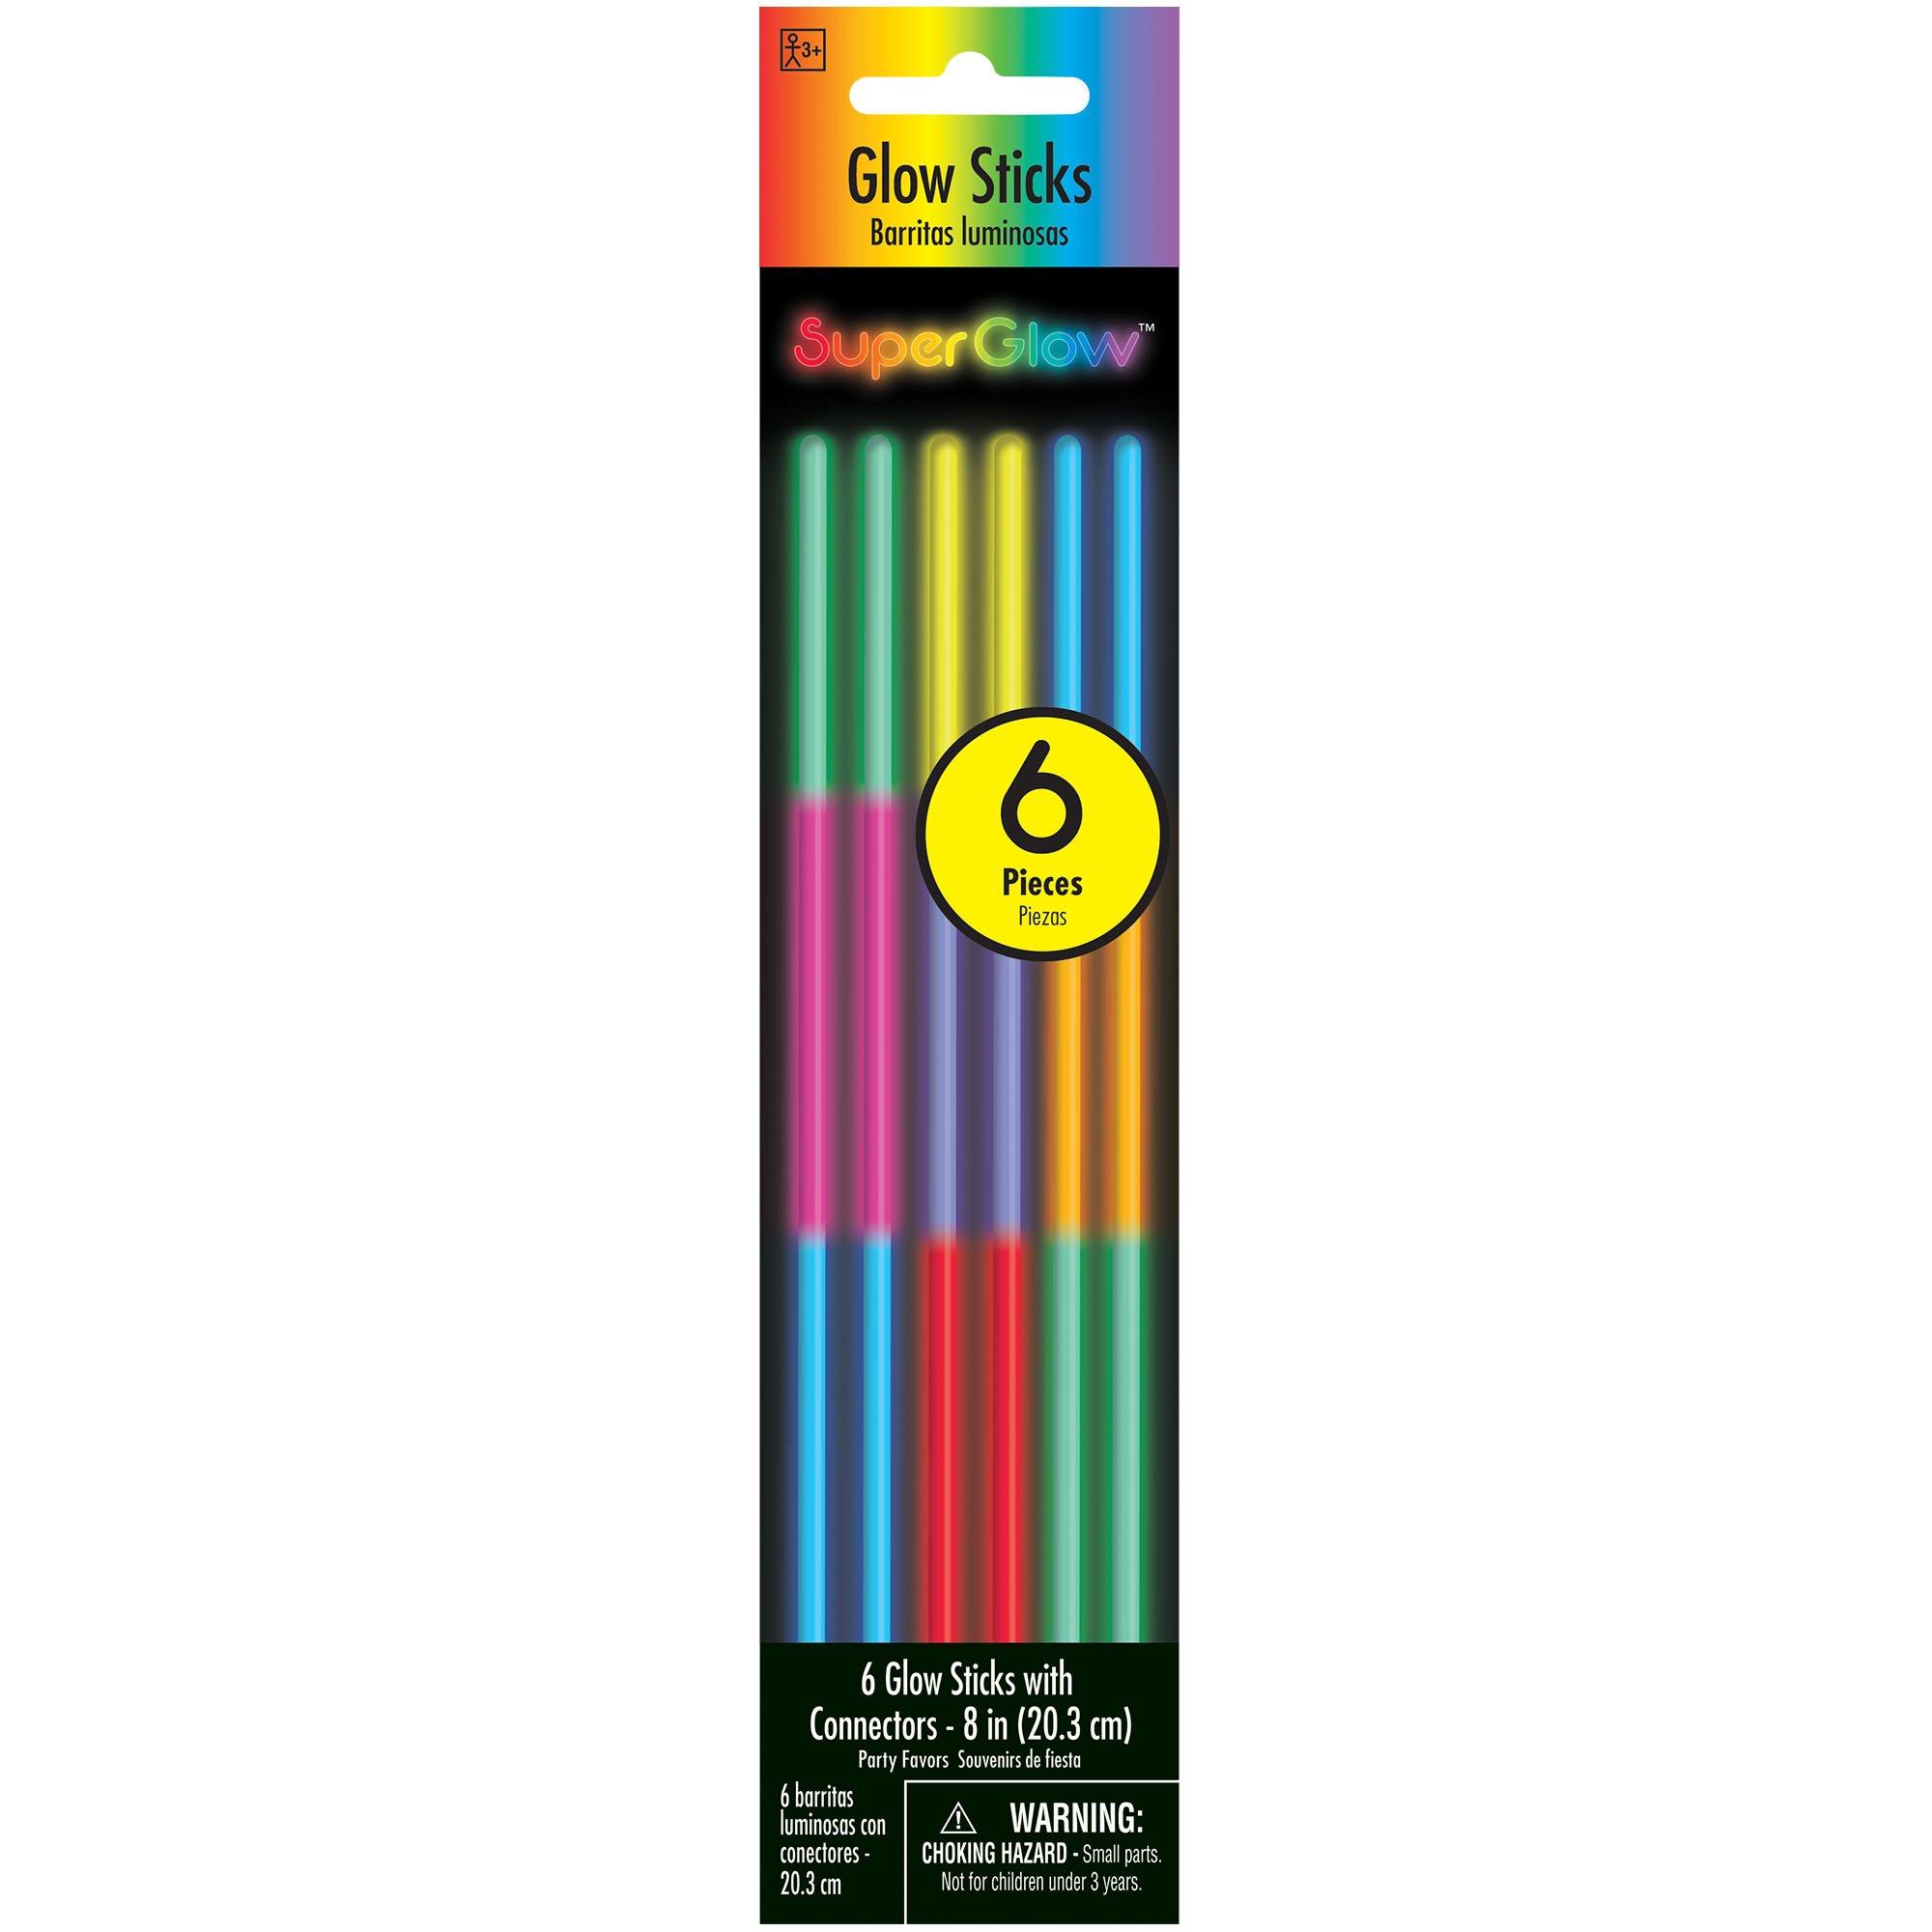 Sweet Stamp - Popsicle Sticks 8 Pack - Neon Glow